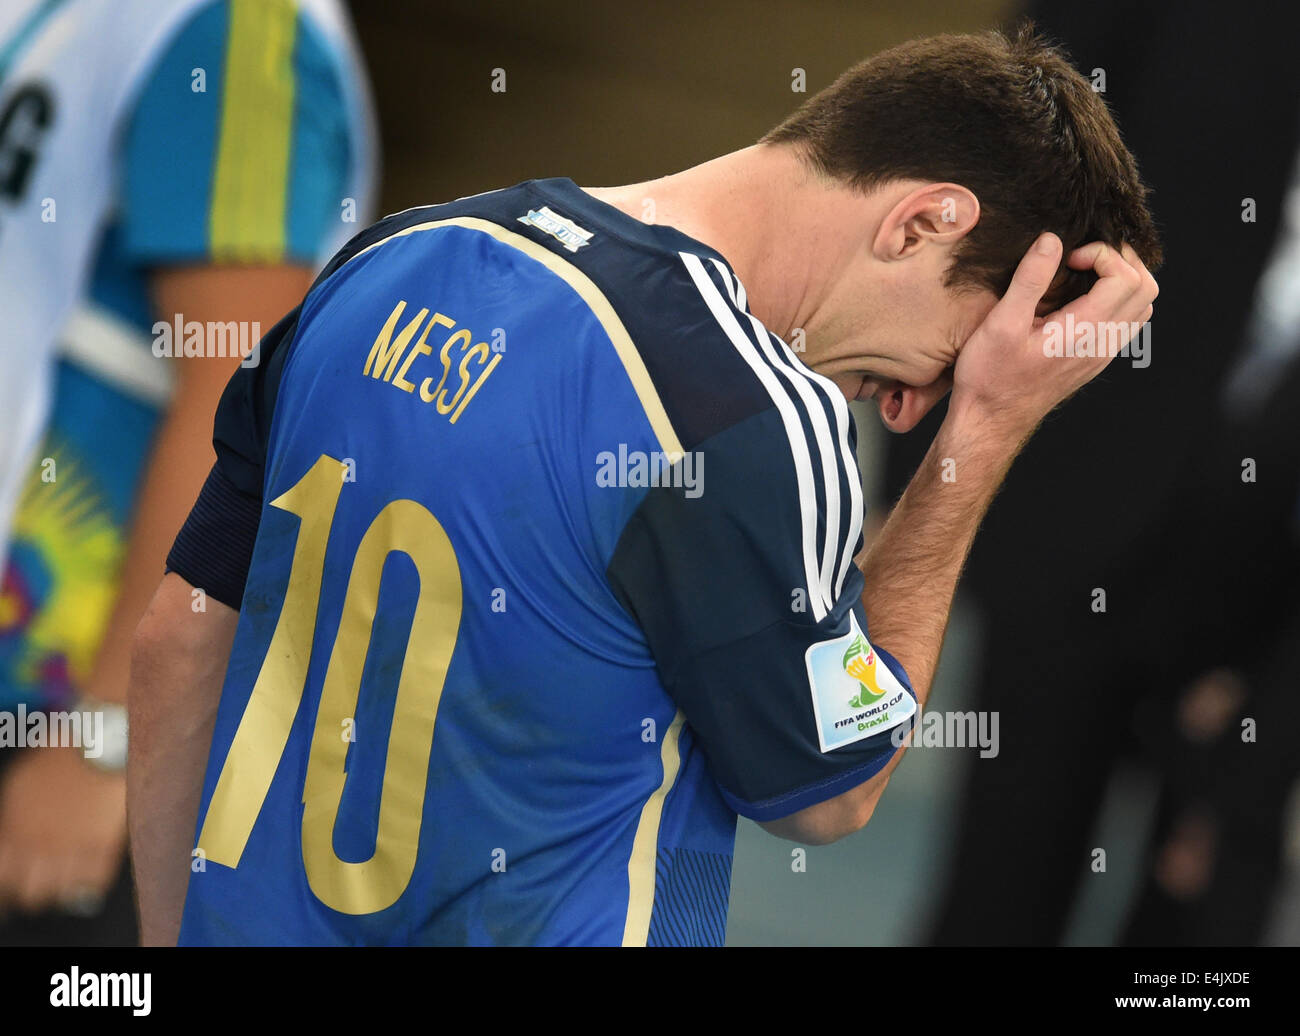 Rio de Janeiro, Brazil. 13th July, 2014. Argentina's Lionel Messi walks dejected over the pitch after losing the FIFA World Cup 2014 final between Germany and Argentina at the Estadio do Maracana in Rio de Janeiro, Brazil, 13 July 2014. Photo: Andreas Gebert/dpa/Alamy Live News Stock Photo